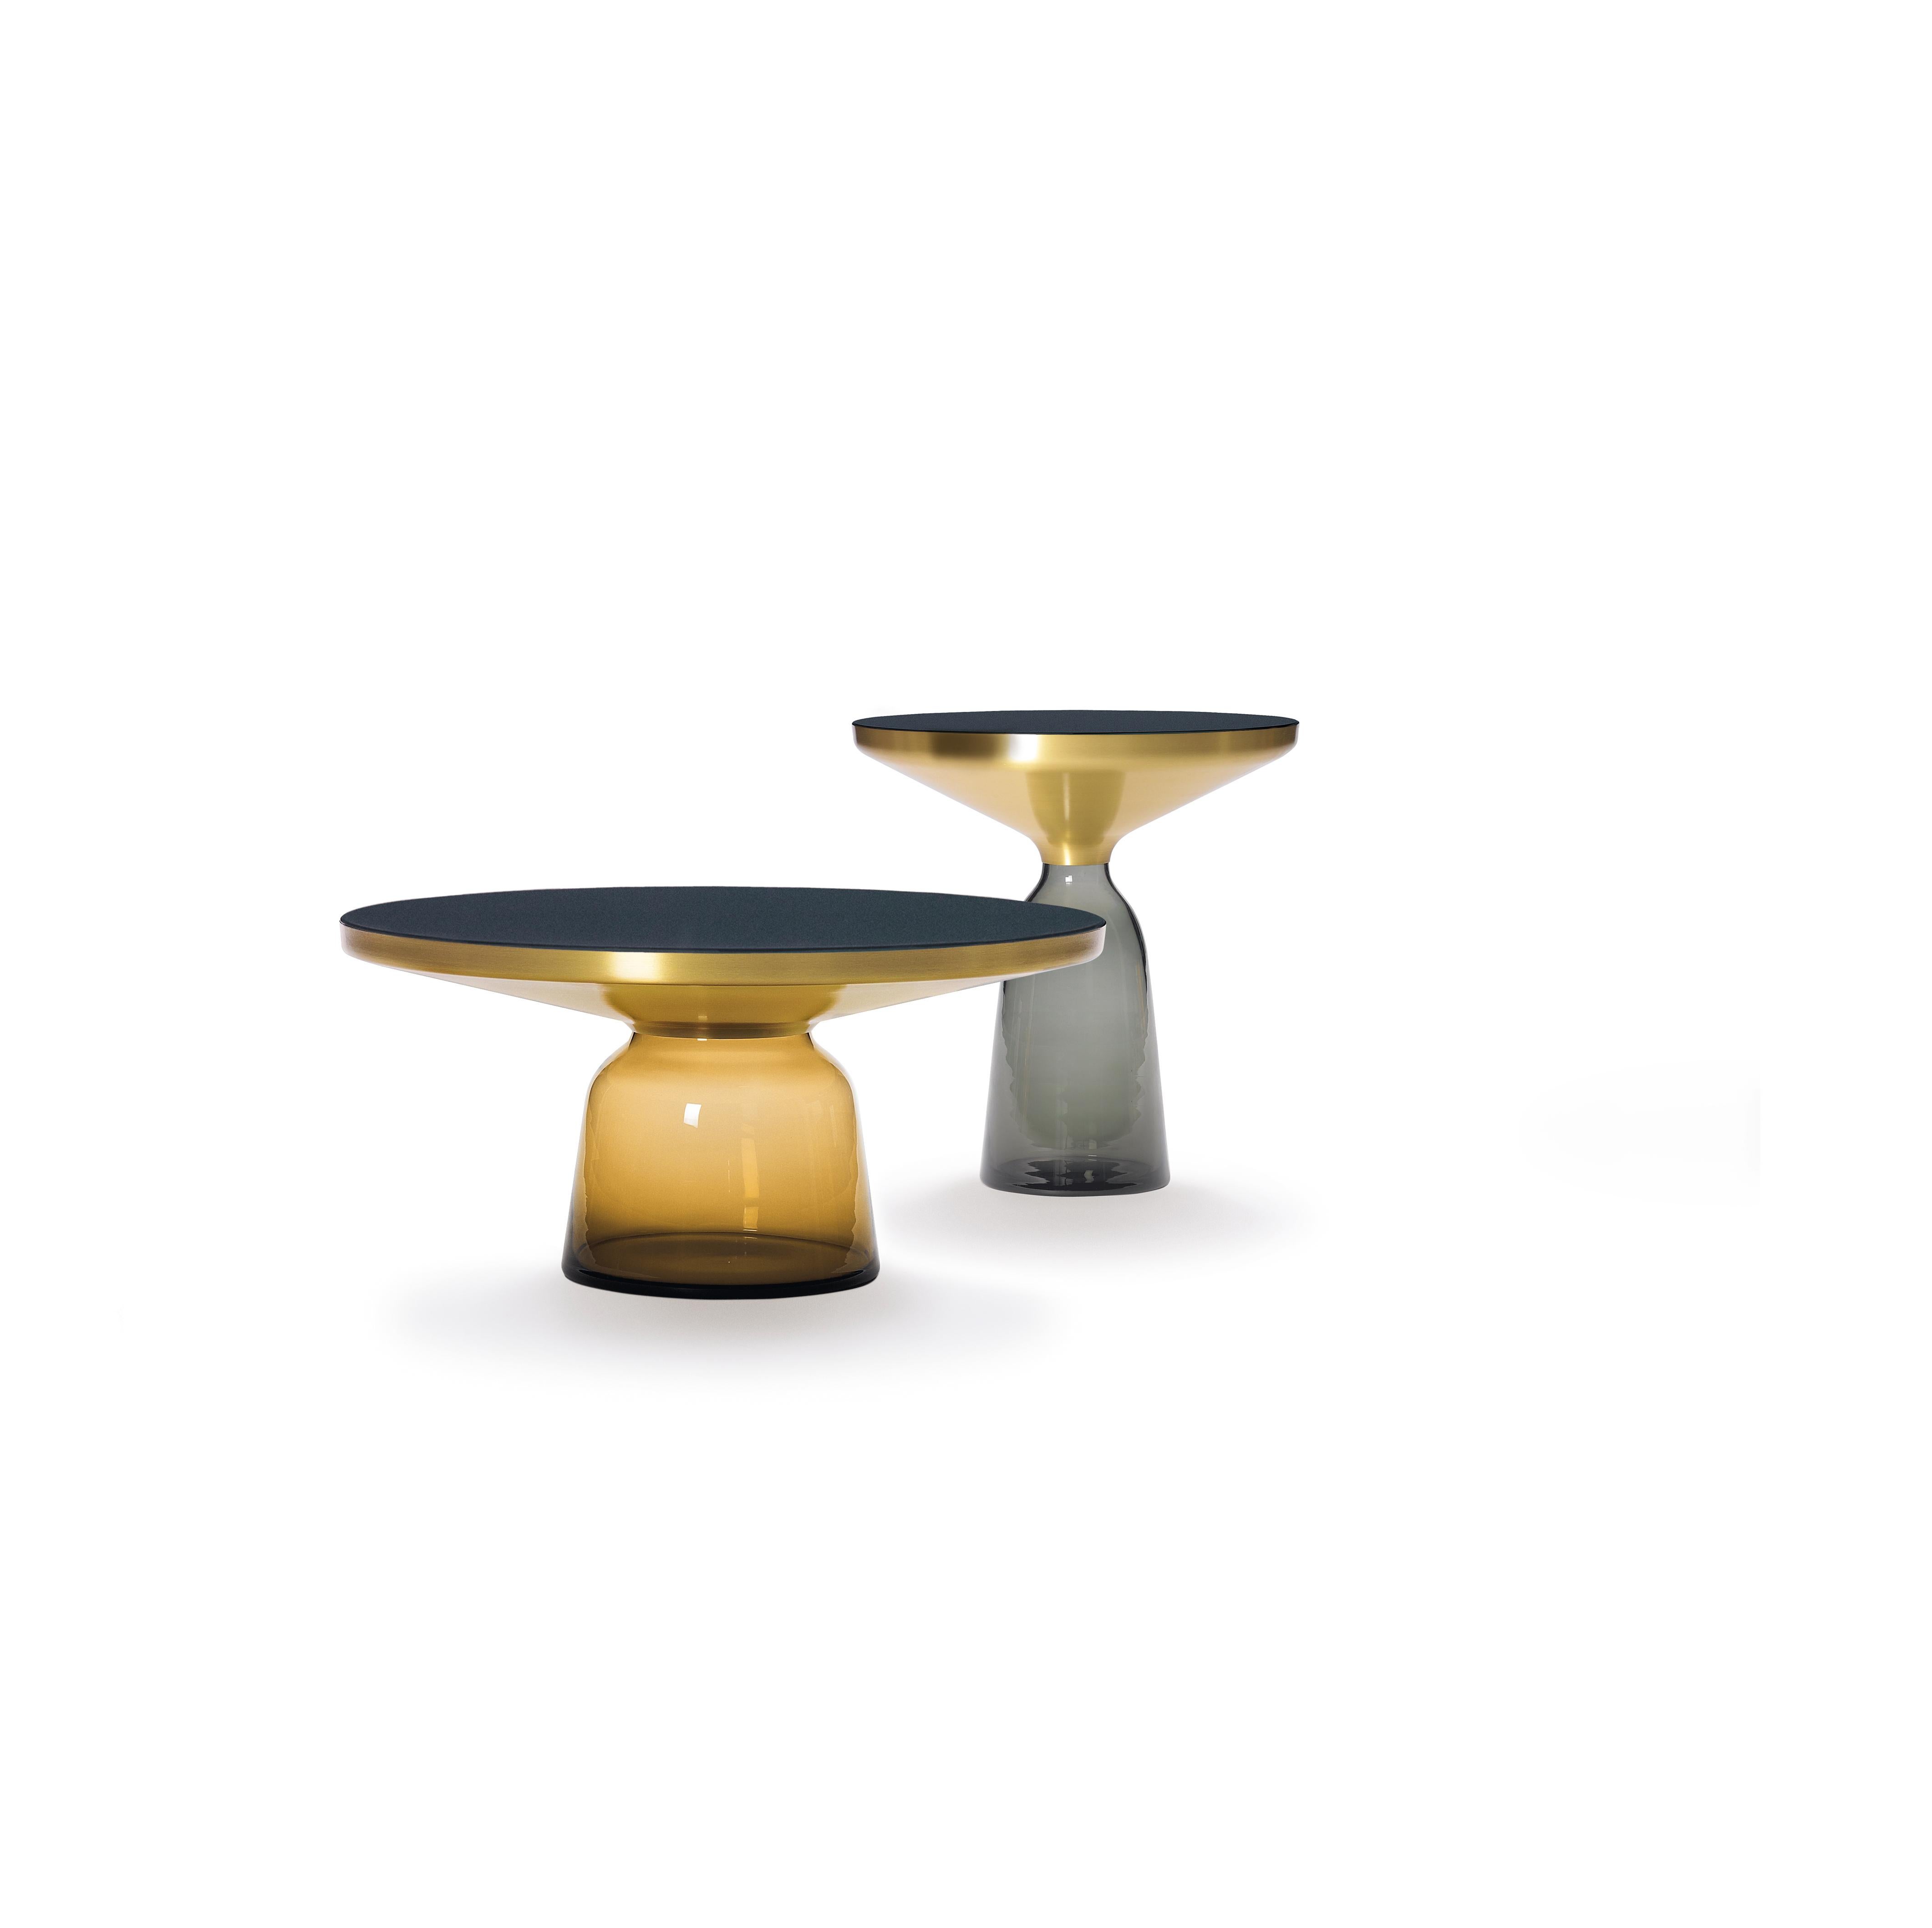 The bell table by Sebastian Herkner turns our perceptual habits on their head, using the lightweight, fragile material of glass as base for a metal top that seems to float above it. Hand blown in the traditional manner using a wooden mold, the